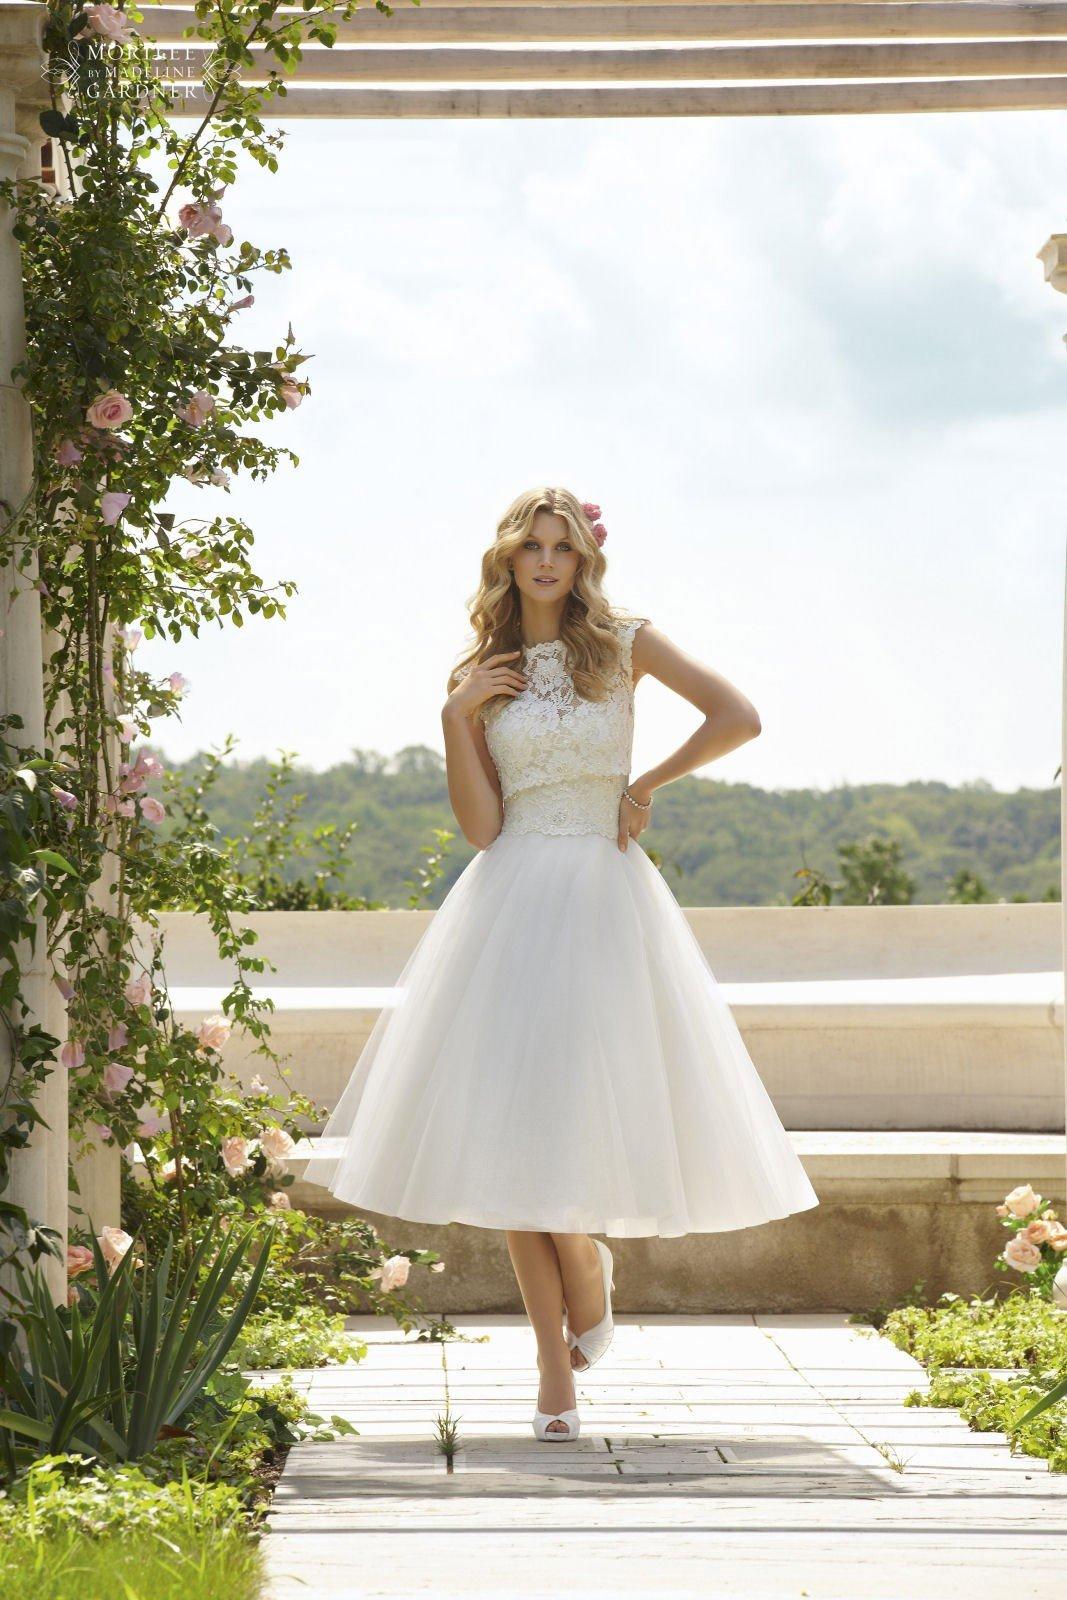 Our Favourite 1950s Inspired Wedding Dresses - hitched.co.uk - hitched.co.uk